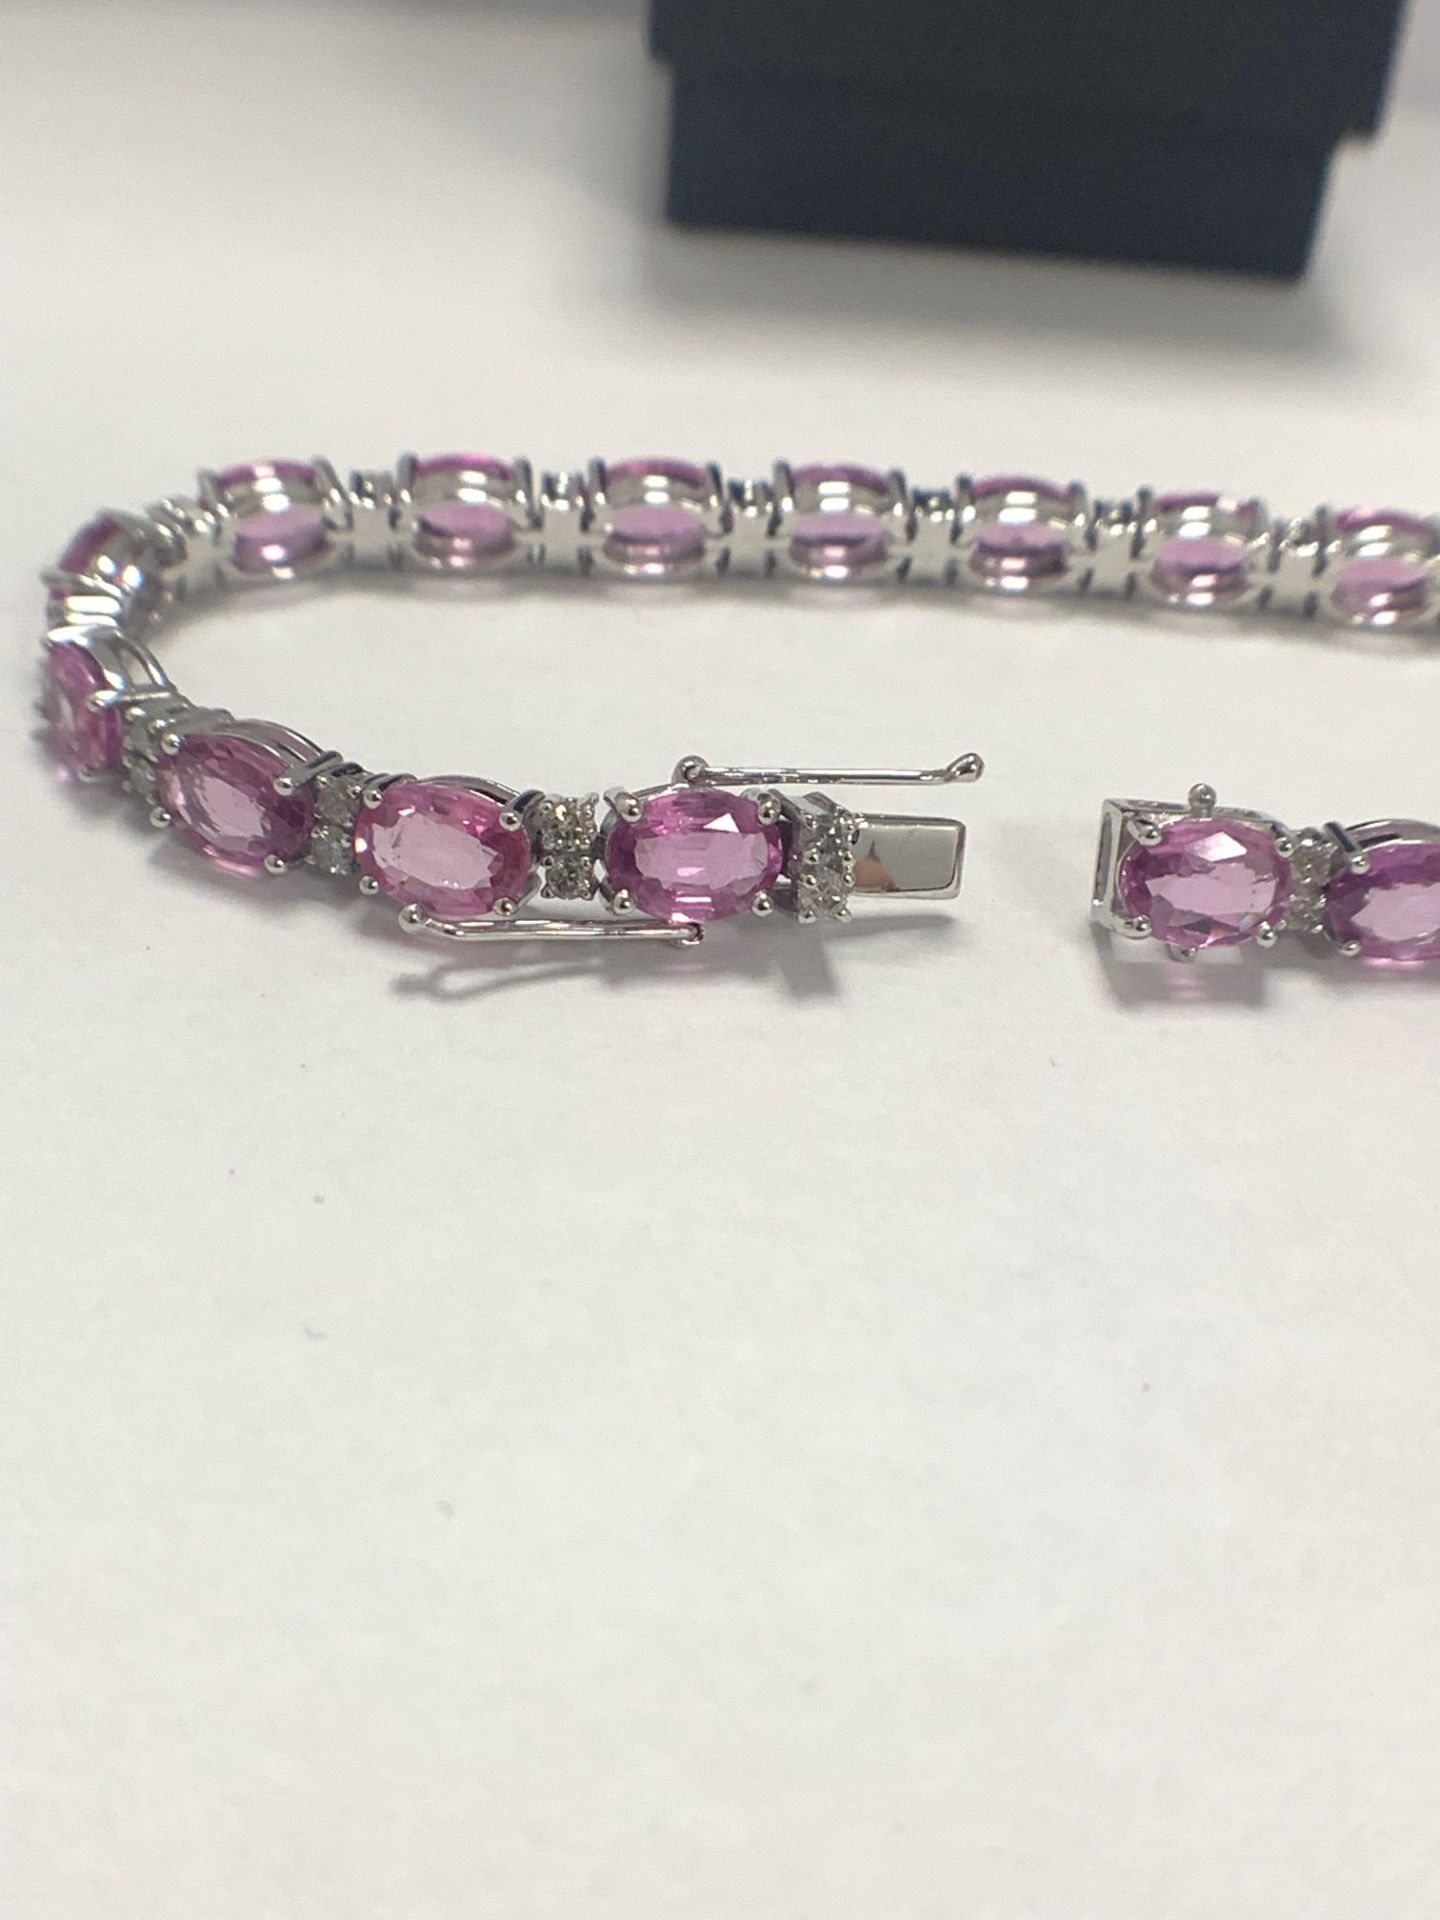 14ct White Gold Sapphire and Diamond bracelet featuring, 19 oval cut, pink Sapphires (15.93ct TSW) - Image 5 of 11